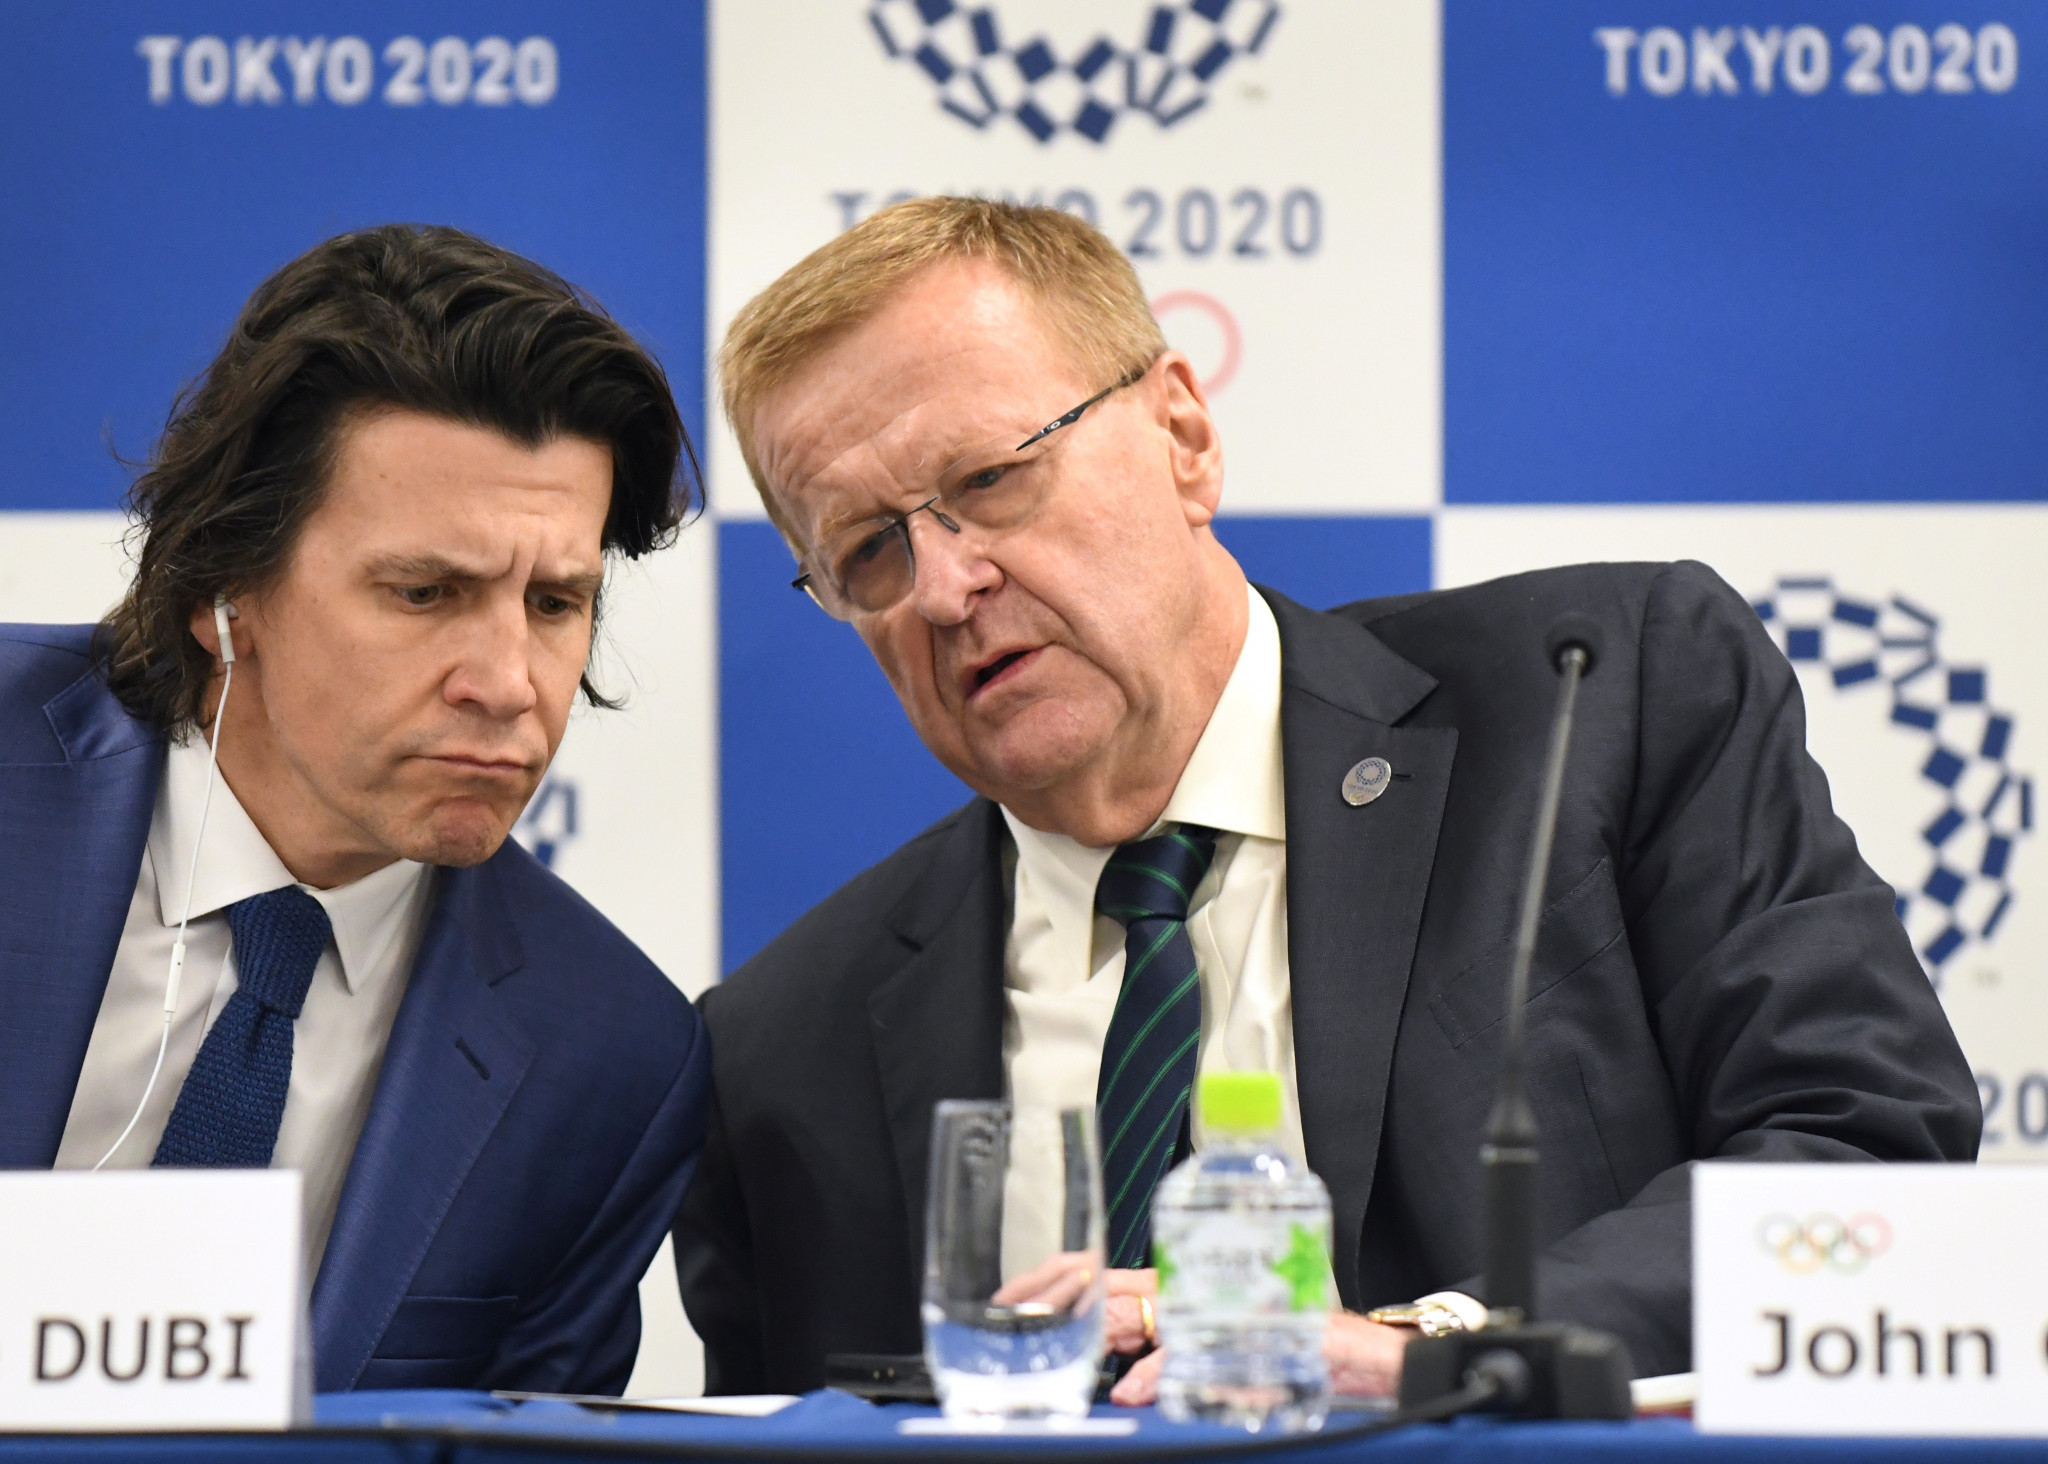 John Coates, right, admitted that problems still remain for Tokyo 2020 ©Getty Images